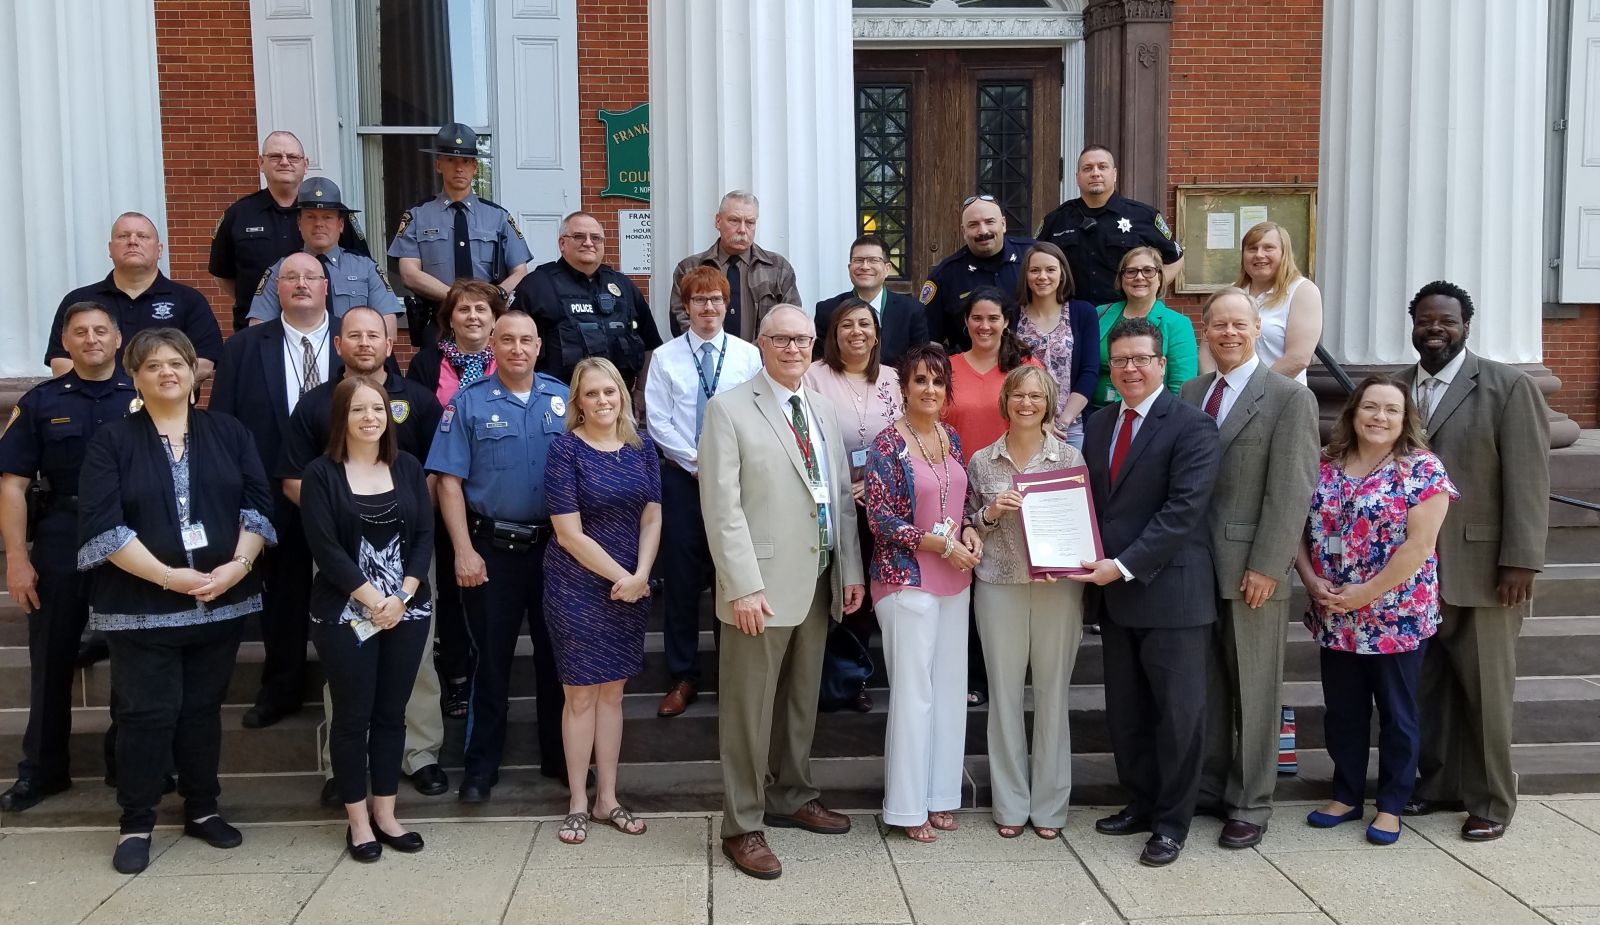 Representatives from local and state law enforcement, Franklin County government and community agencies join together to recognize May 8, 2018 as Franklin County Stepping Up Day of Action.